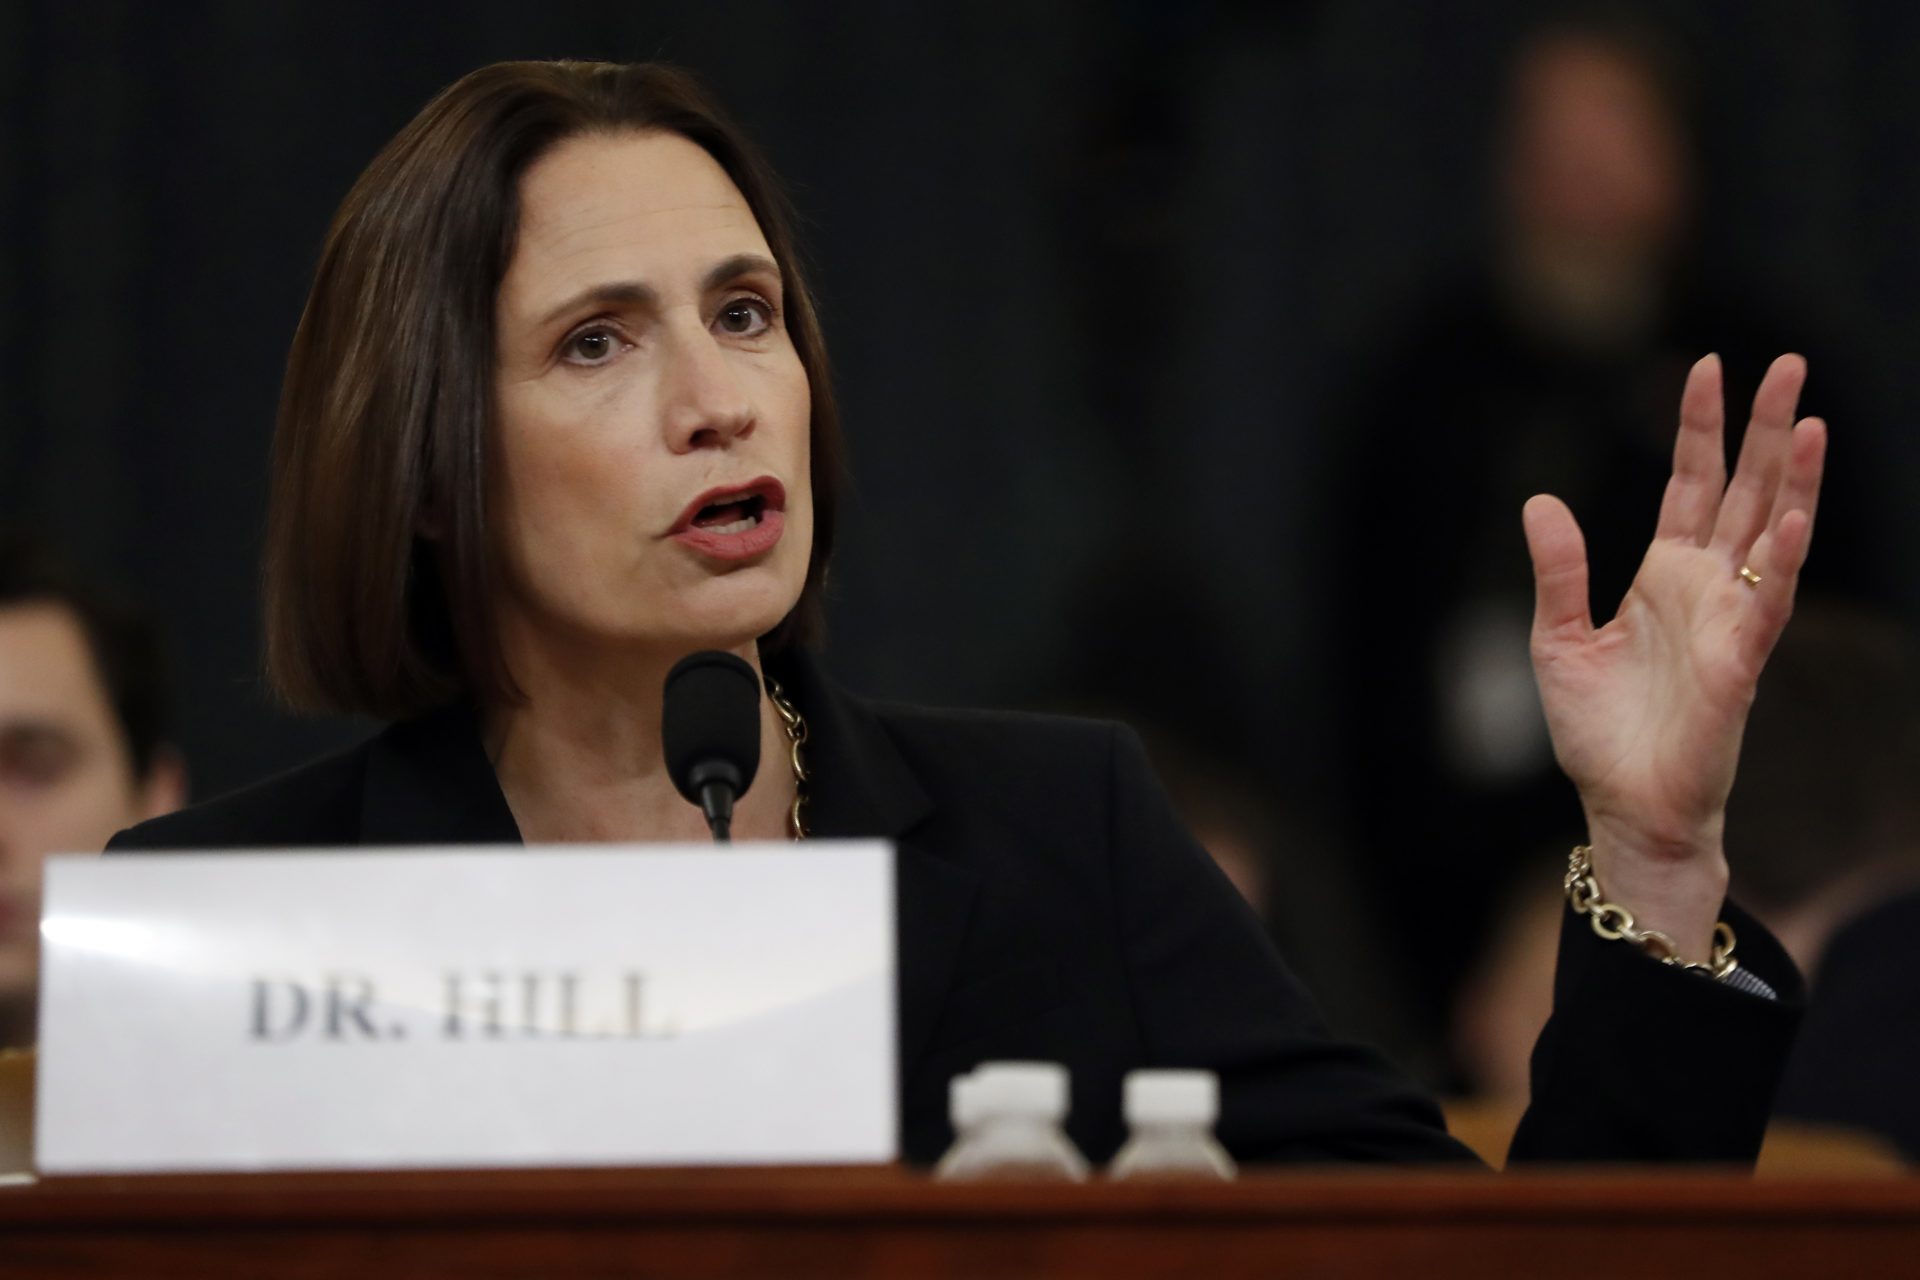 Former White House national security aide Fiona Hill testifies before the House Intelligence Committee on Capitol Hill in Washington, Thursday, Nov. 21, 2019, during a public impeachment hearing of President Donald Trump's efforts to tie U.S. aid for Ukraine to investigations of his political opponents.